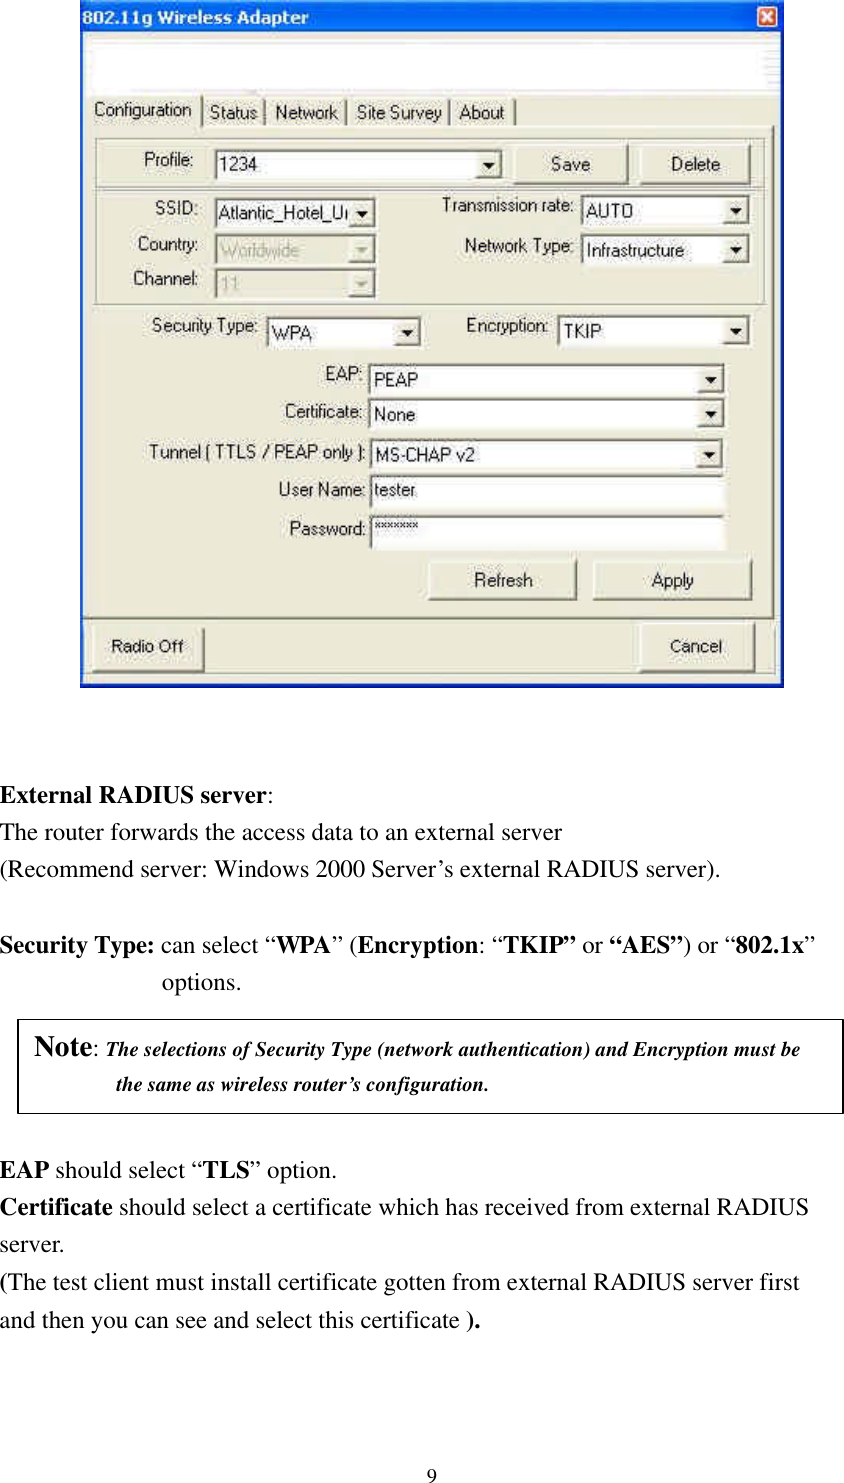 9    External RADIUS server:   The router forwards the access data to an external server (Recommend server: Windows 2000 Server’s external RADIUS server).  Security Type: can select “WPA” (Encryption: “TKIP” or “AES”) or “802.1x”  options.        EAP should select “TLS” option. Certificate should select a certificate which has received from external RADIUS   server. (The test client must install certificate gotten from external RADIUS server first   and then you can see and select this certificate ).     Note: The selections of Security Type (network authentication) and Encryption must be       the same as wireless router’s configuration. 